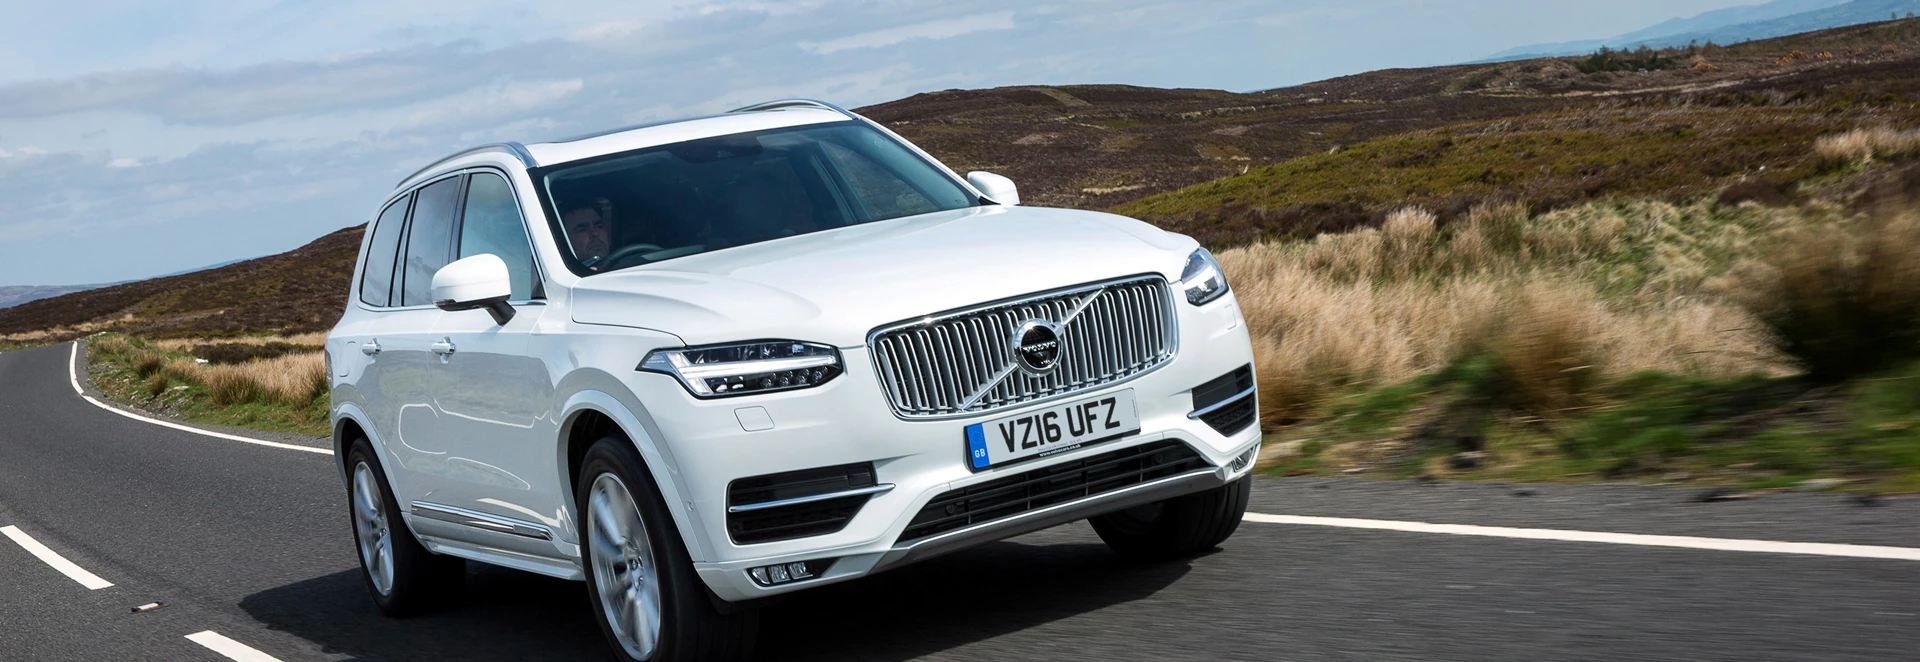 Volvo teams up with Uber to develop autonomous cars 